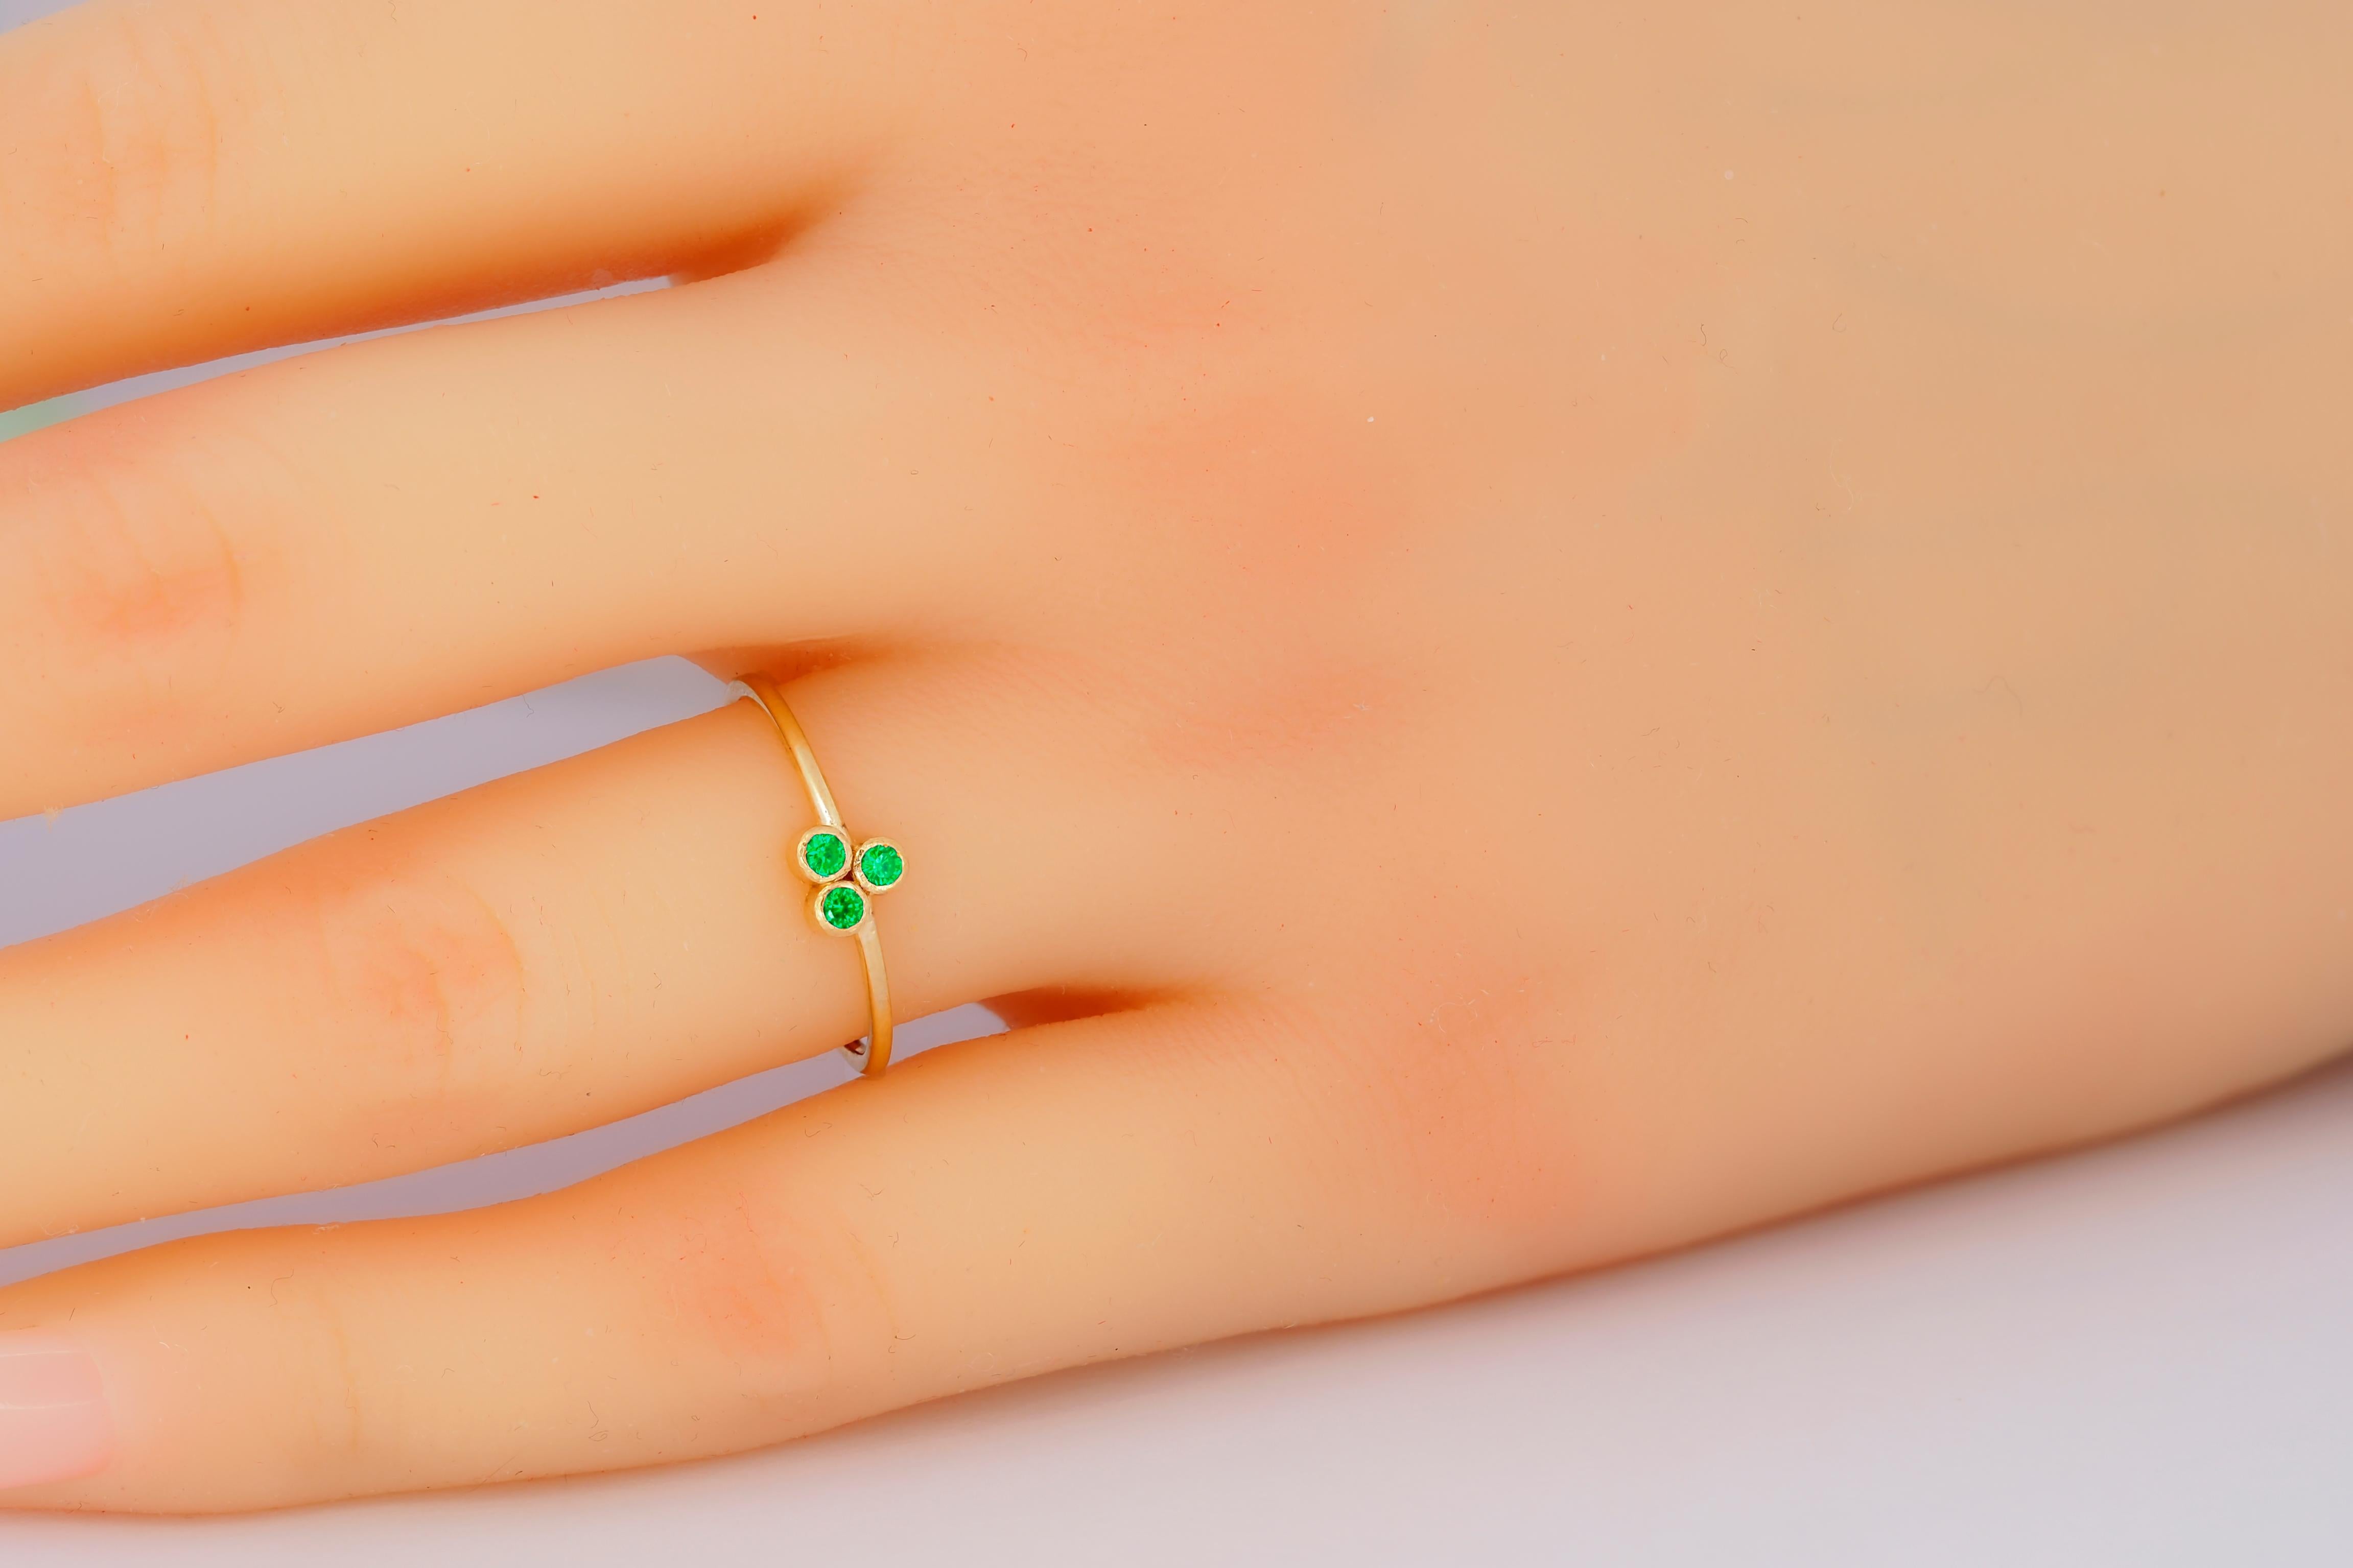 Green Three Stone 14k gold ring.  Triple Stone Ring. Minimalist green lab emerald ring. Dainty gemstone Ring. Thin Band Ring. Stacking Band Ring.

Metal: 14k gold
Weight: 1.8 gr depends from size
Lab emerald, 3 stone, green color, round brilliant